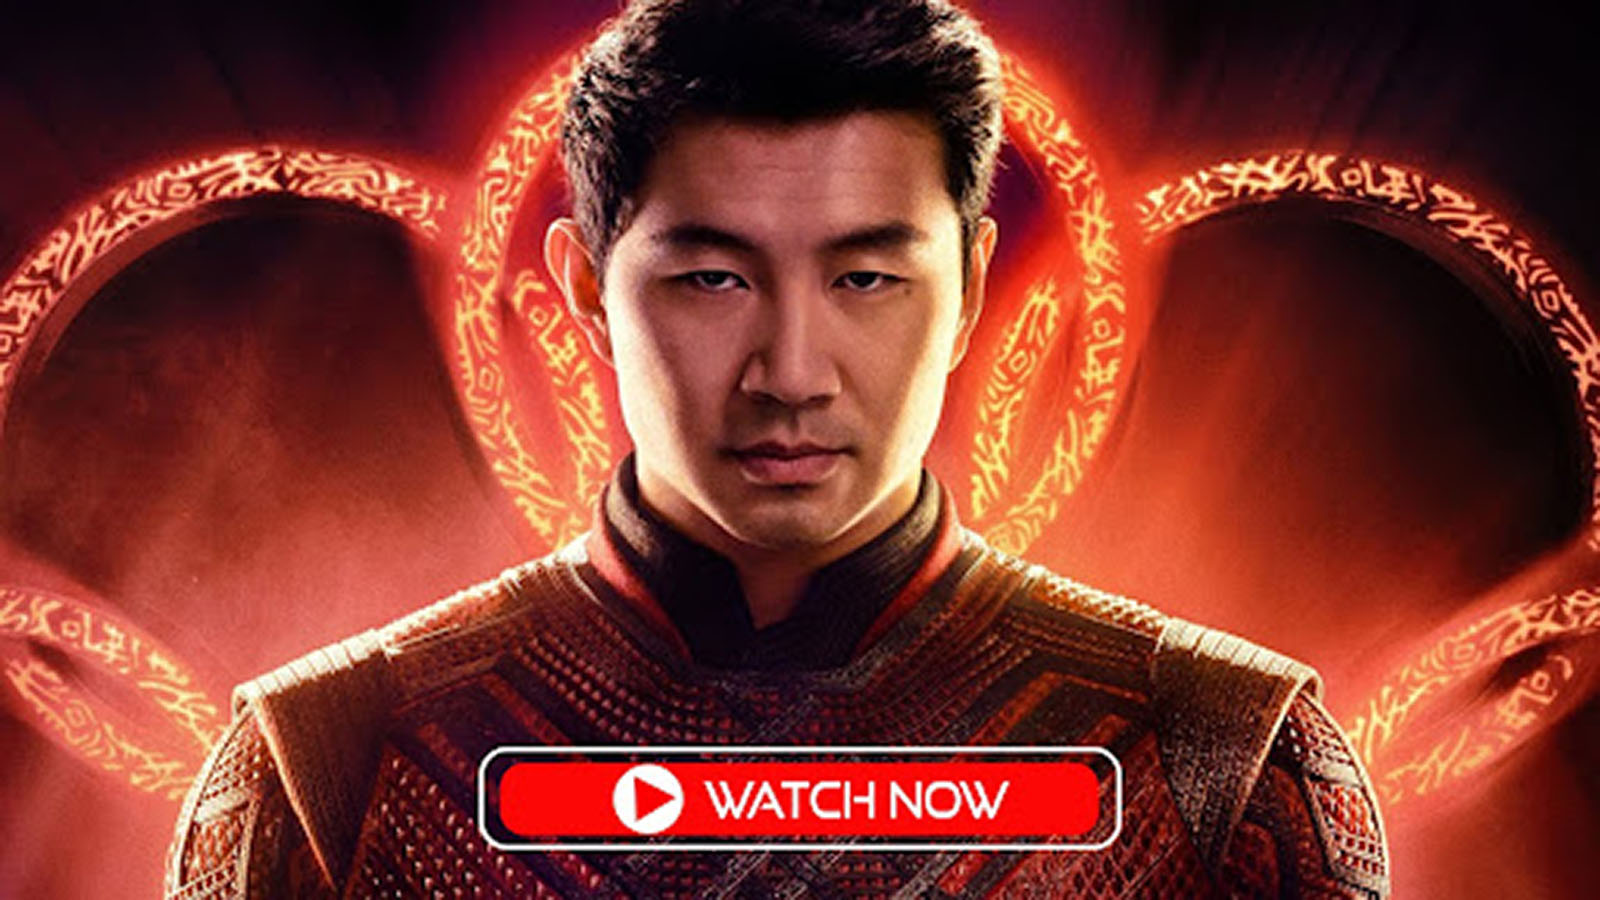 Watch ‘Shang-Chi’ Full Movie Online Free Streaming HBO Max?